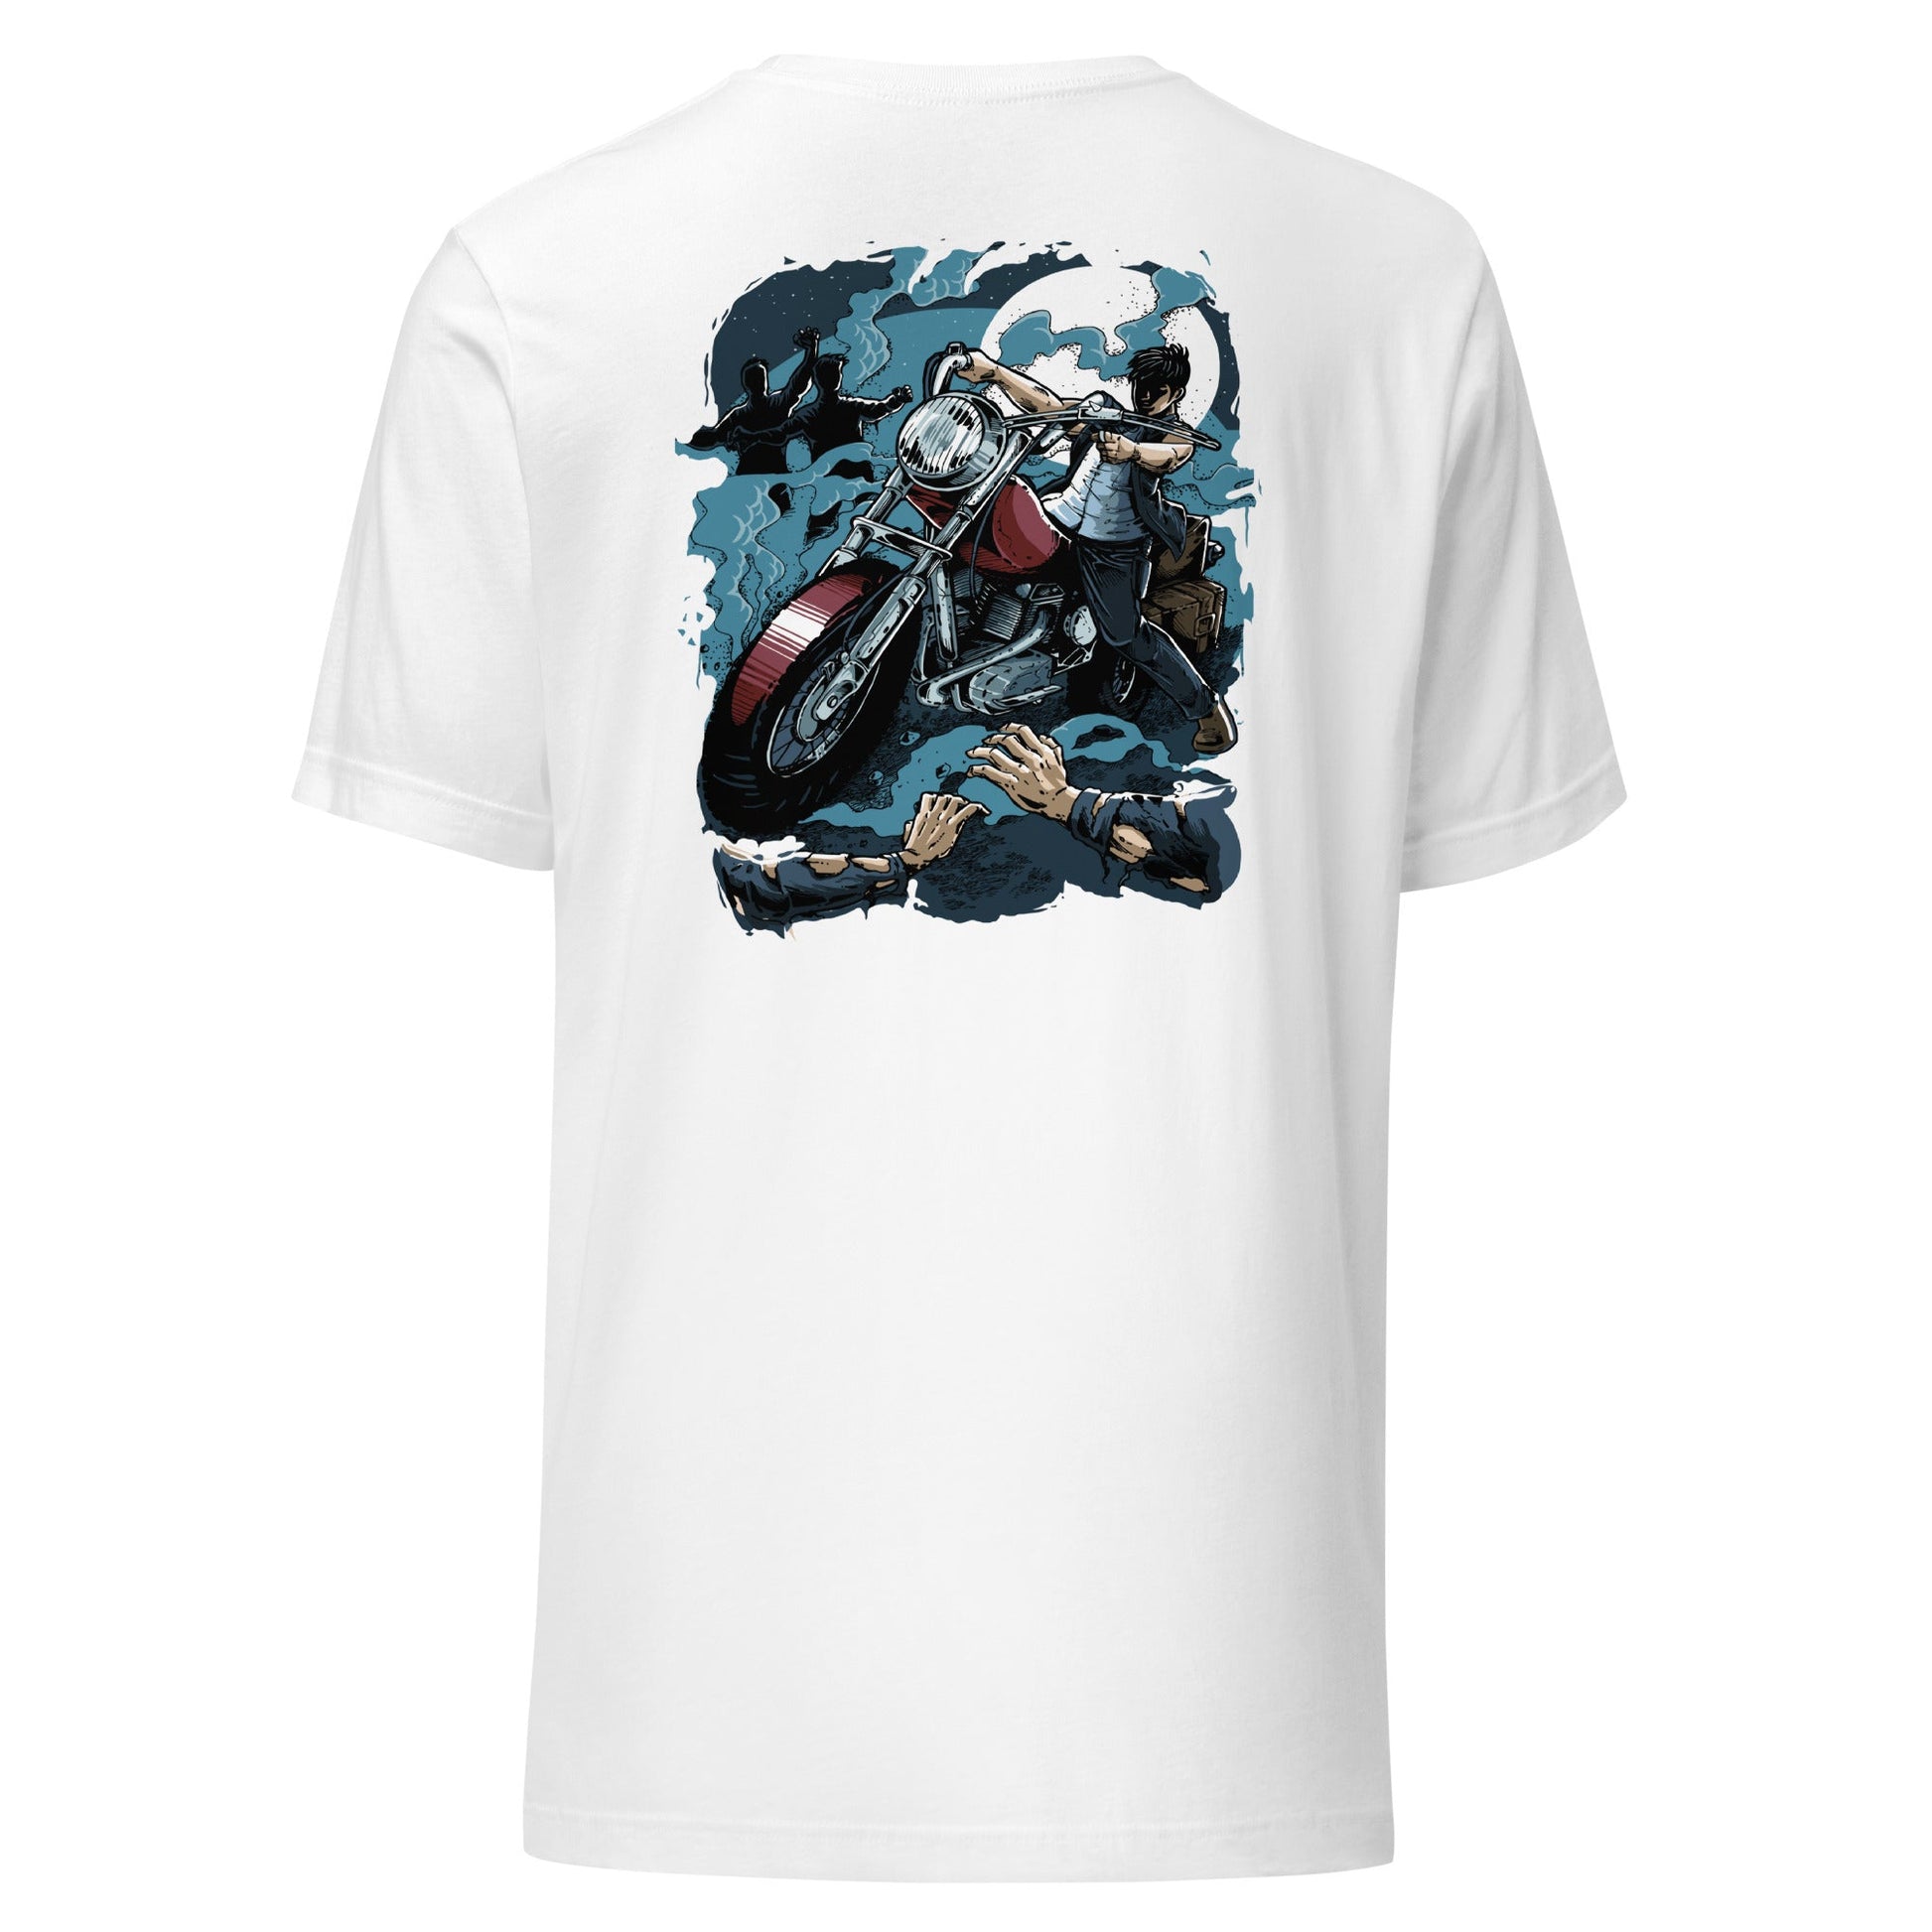 Ride in Style with our Cool Motor Rider T-Shirt | Unisex Biker Apparel